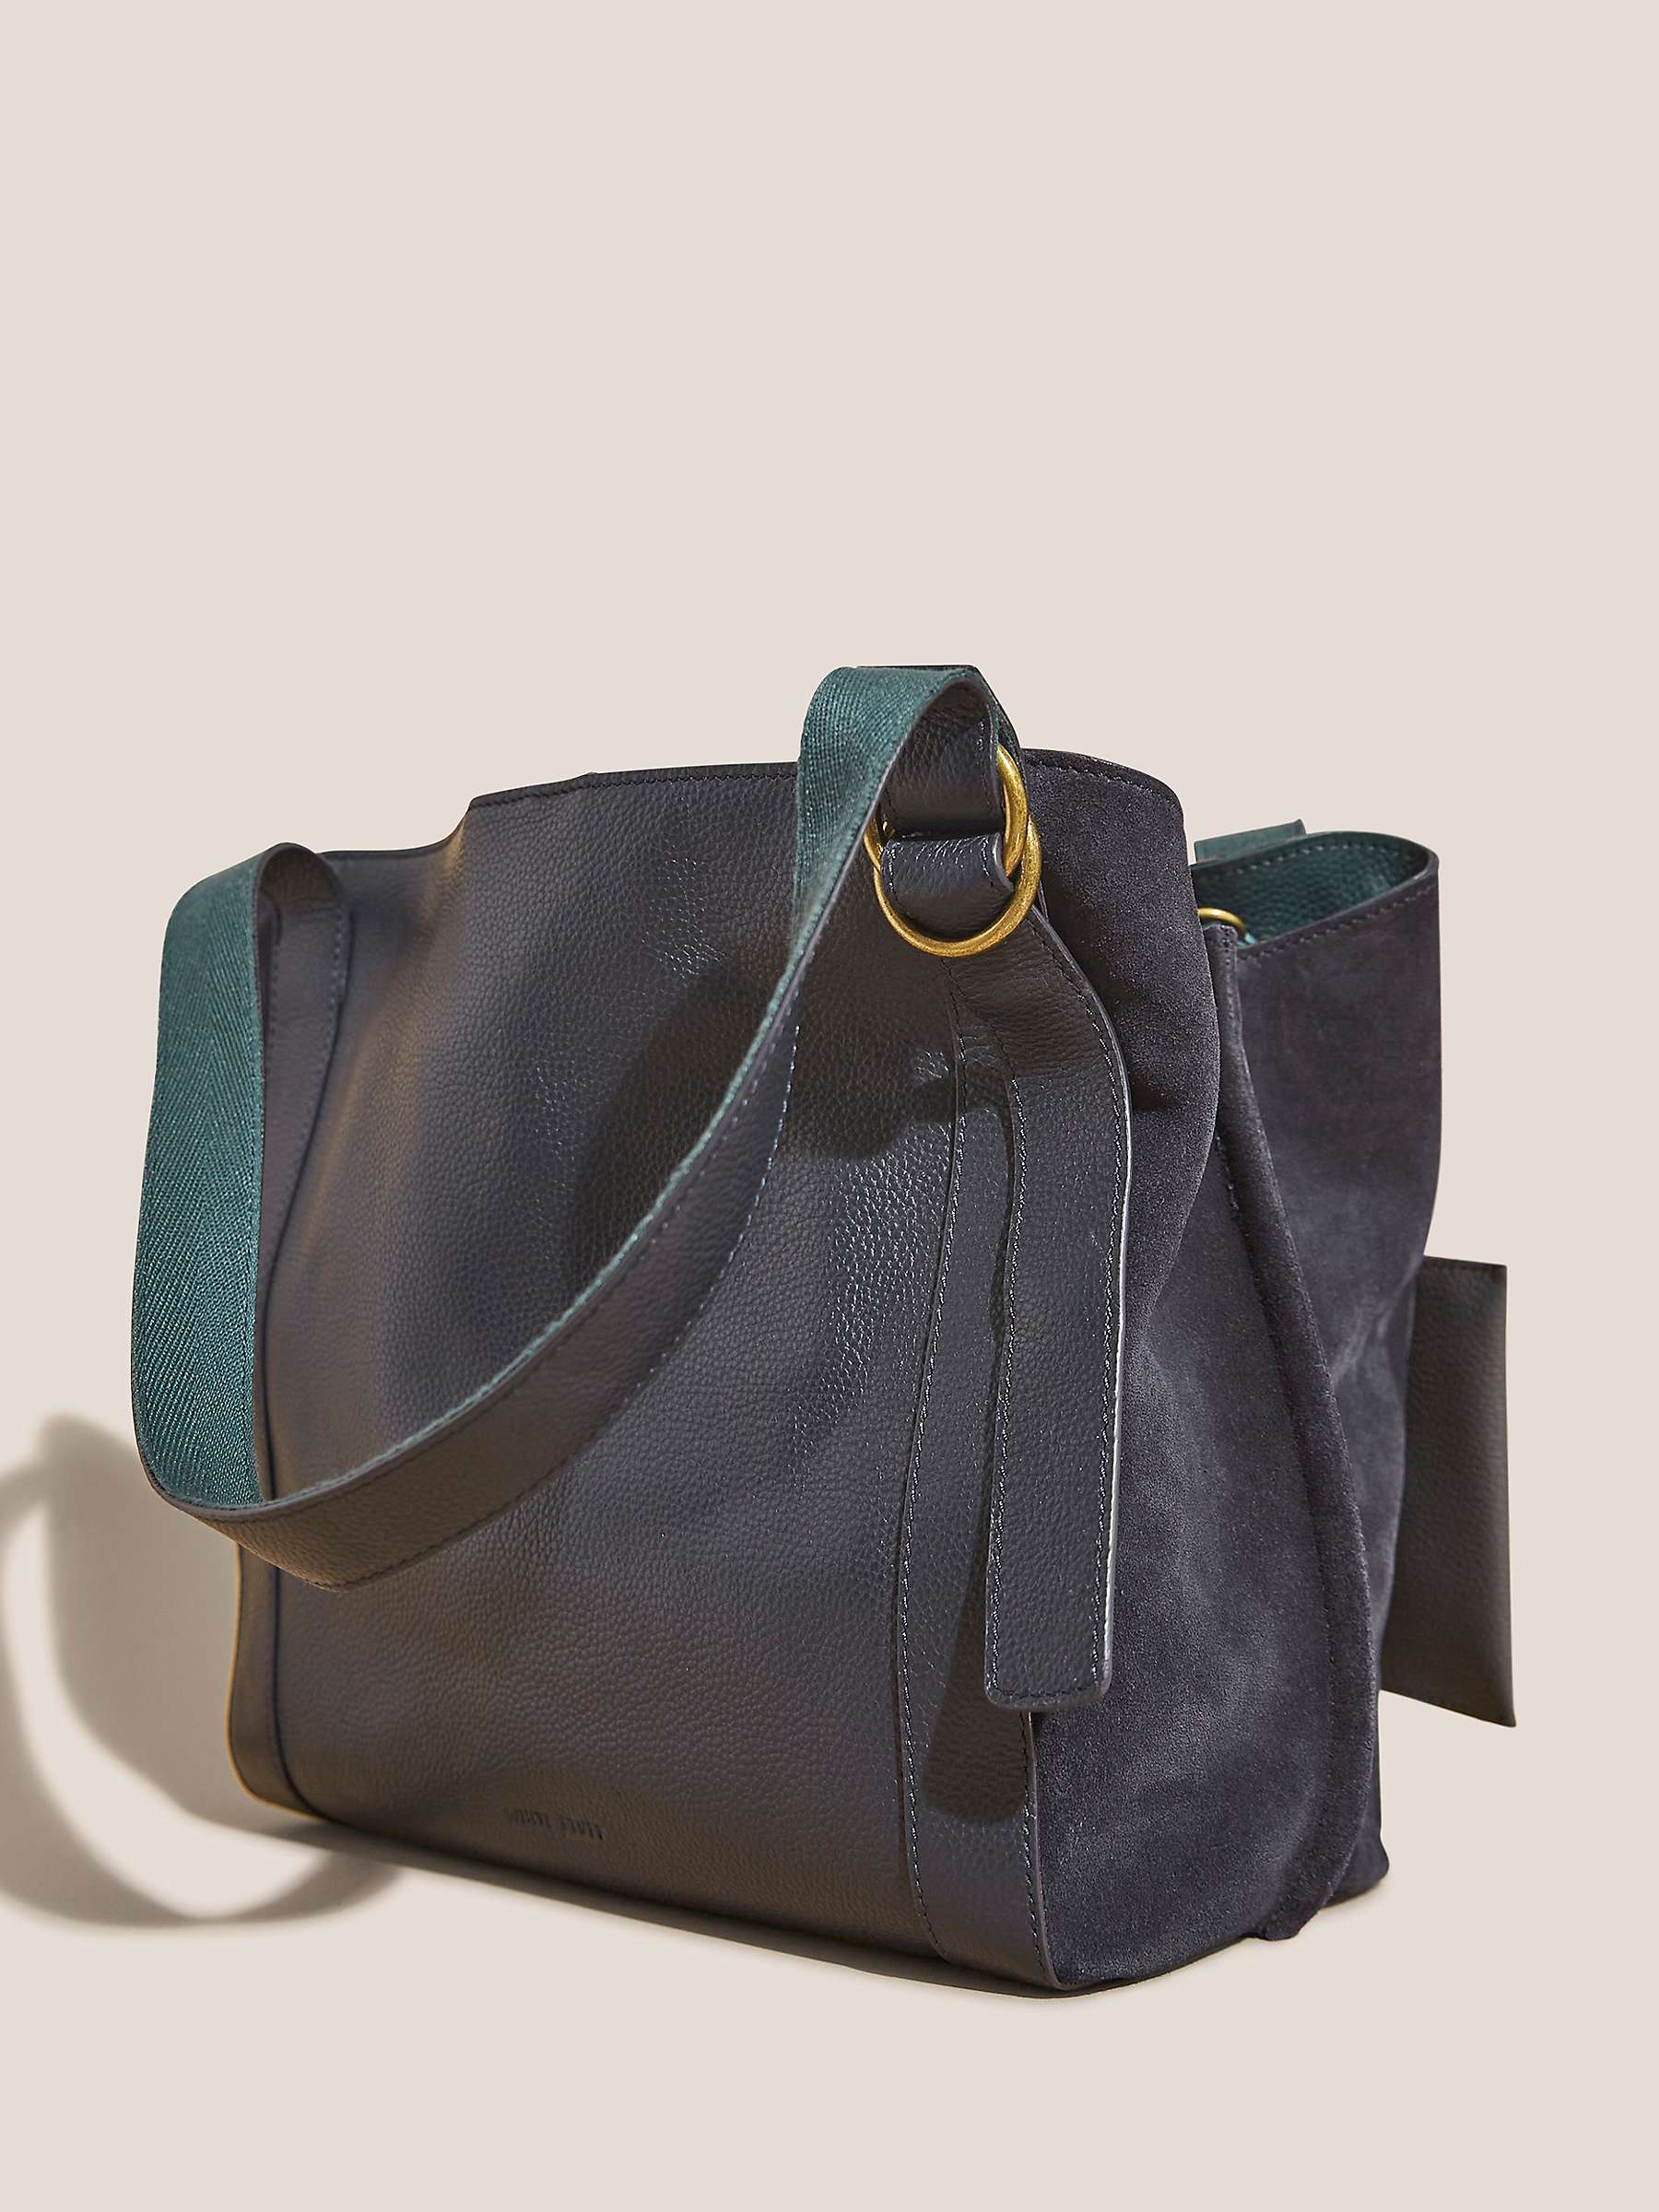 Buy White Stuff Hannah Leather and Suede Tote Bag, Dark Navy Online at johnlewis.com